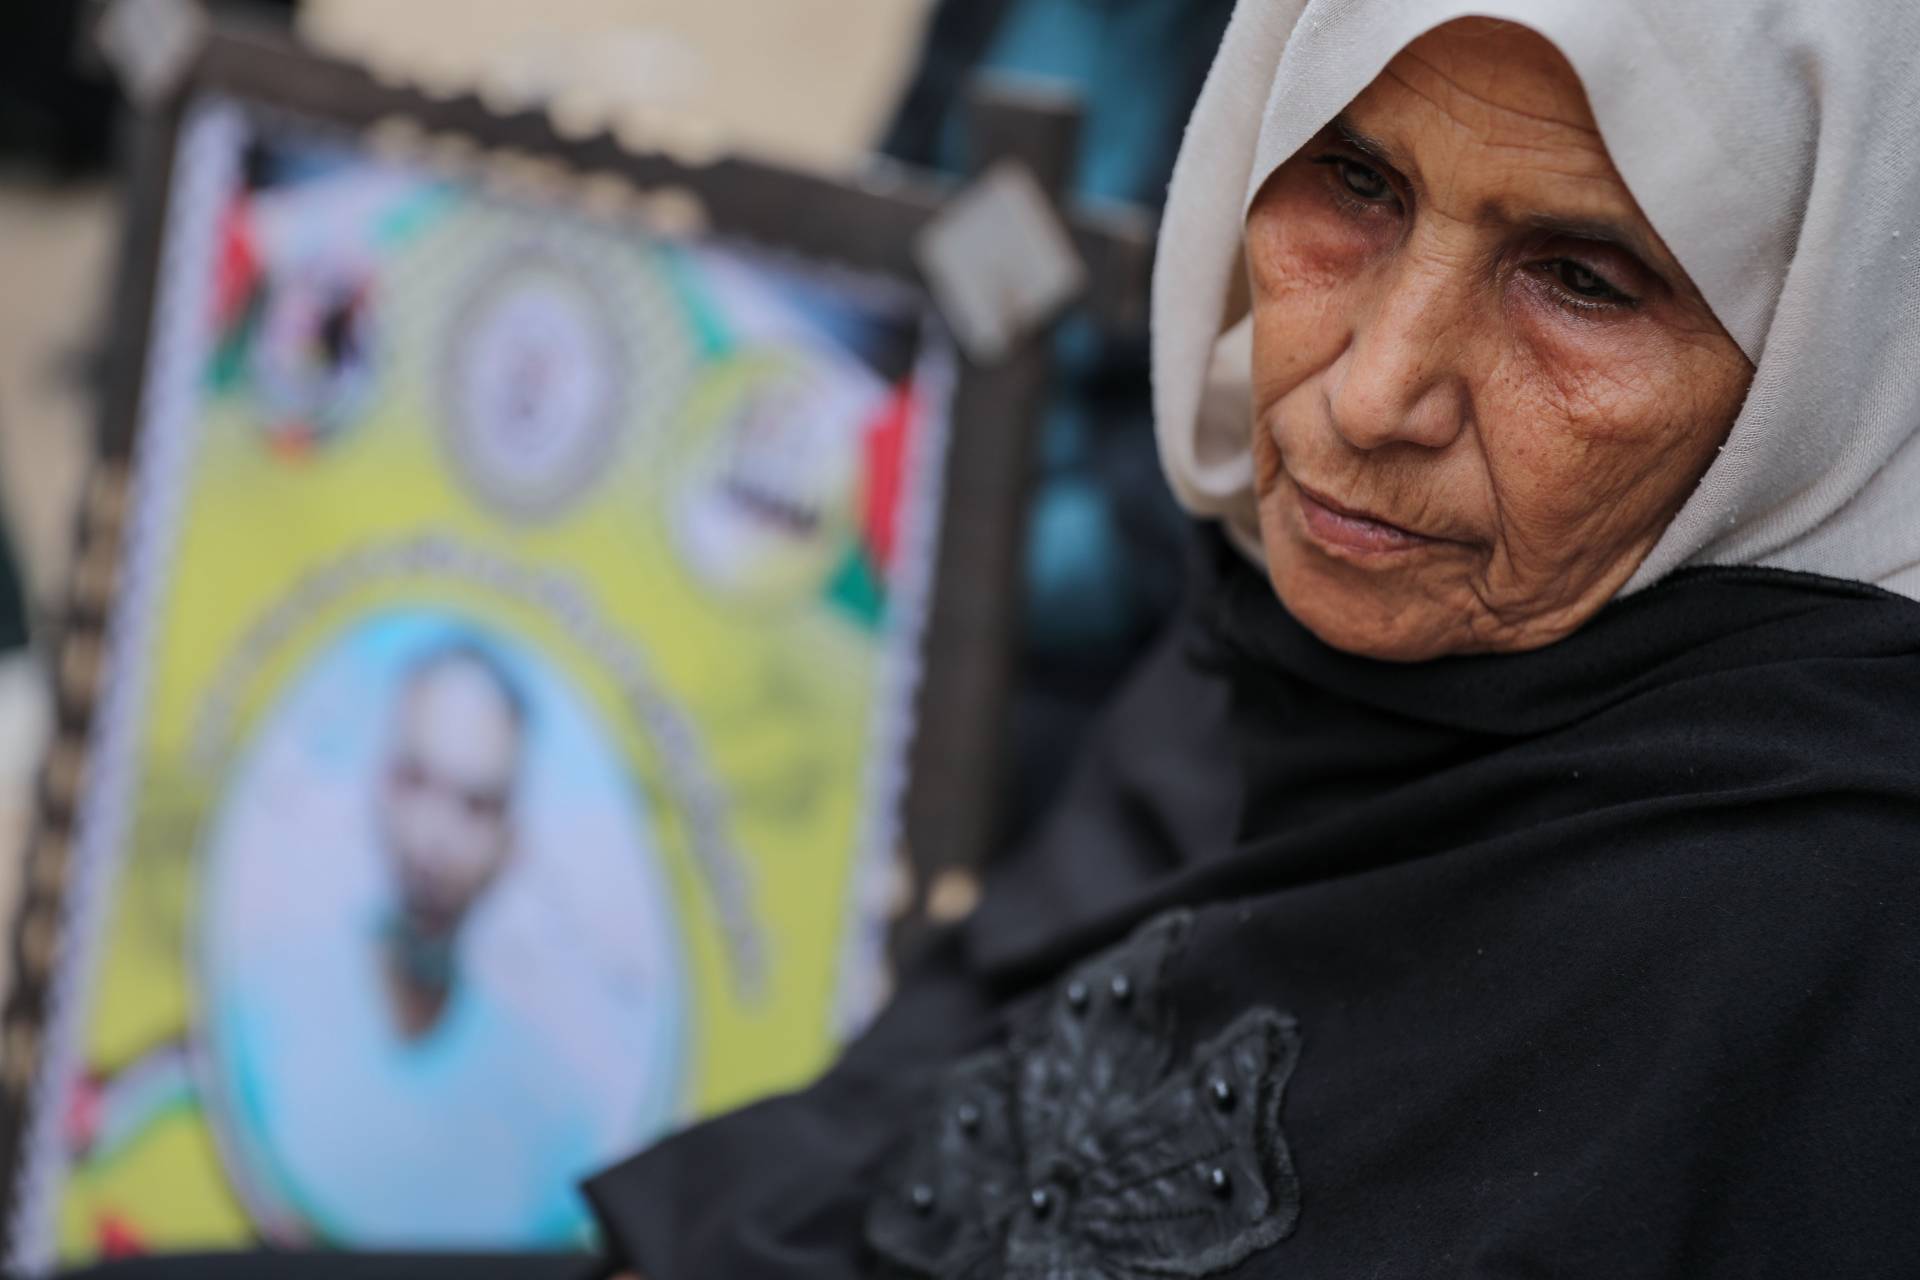 Um Sami, Sami al-Amour's mother, was the only one allowed to visit him in prison. However, she had not been able to see him for the past four years due to the Israeli restrictions.